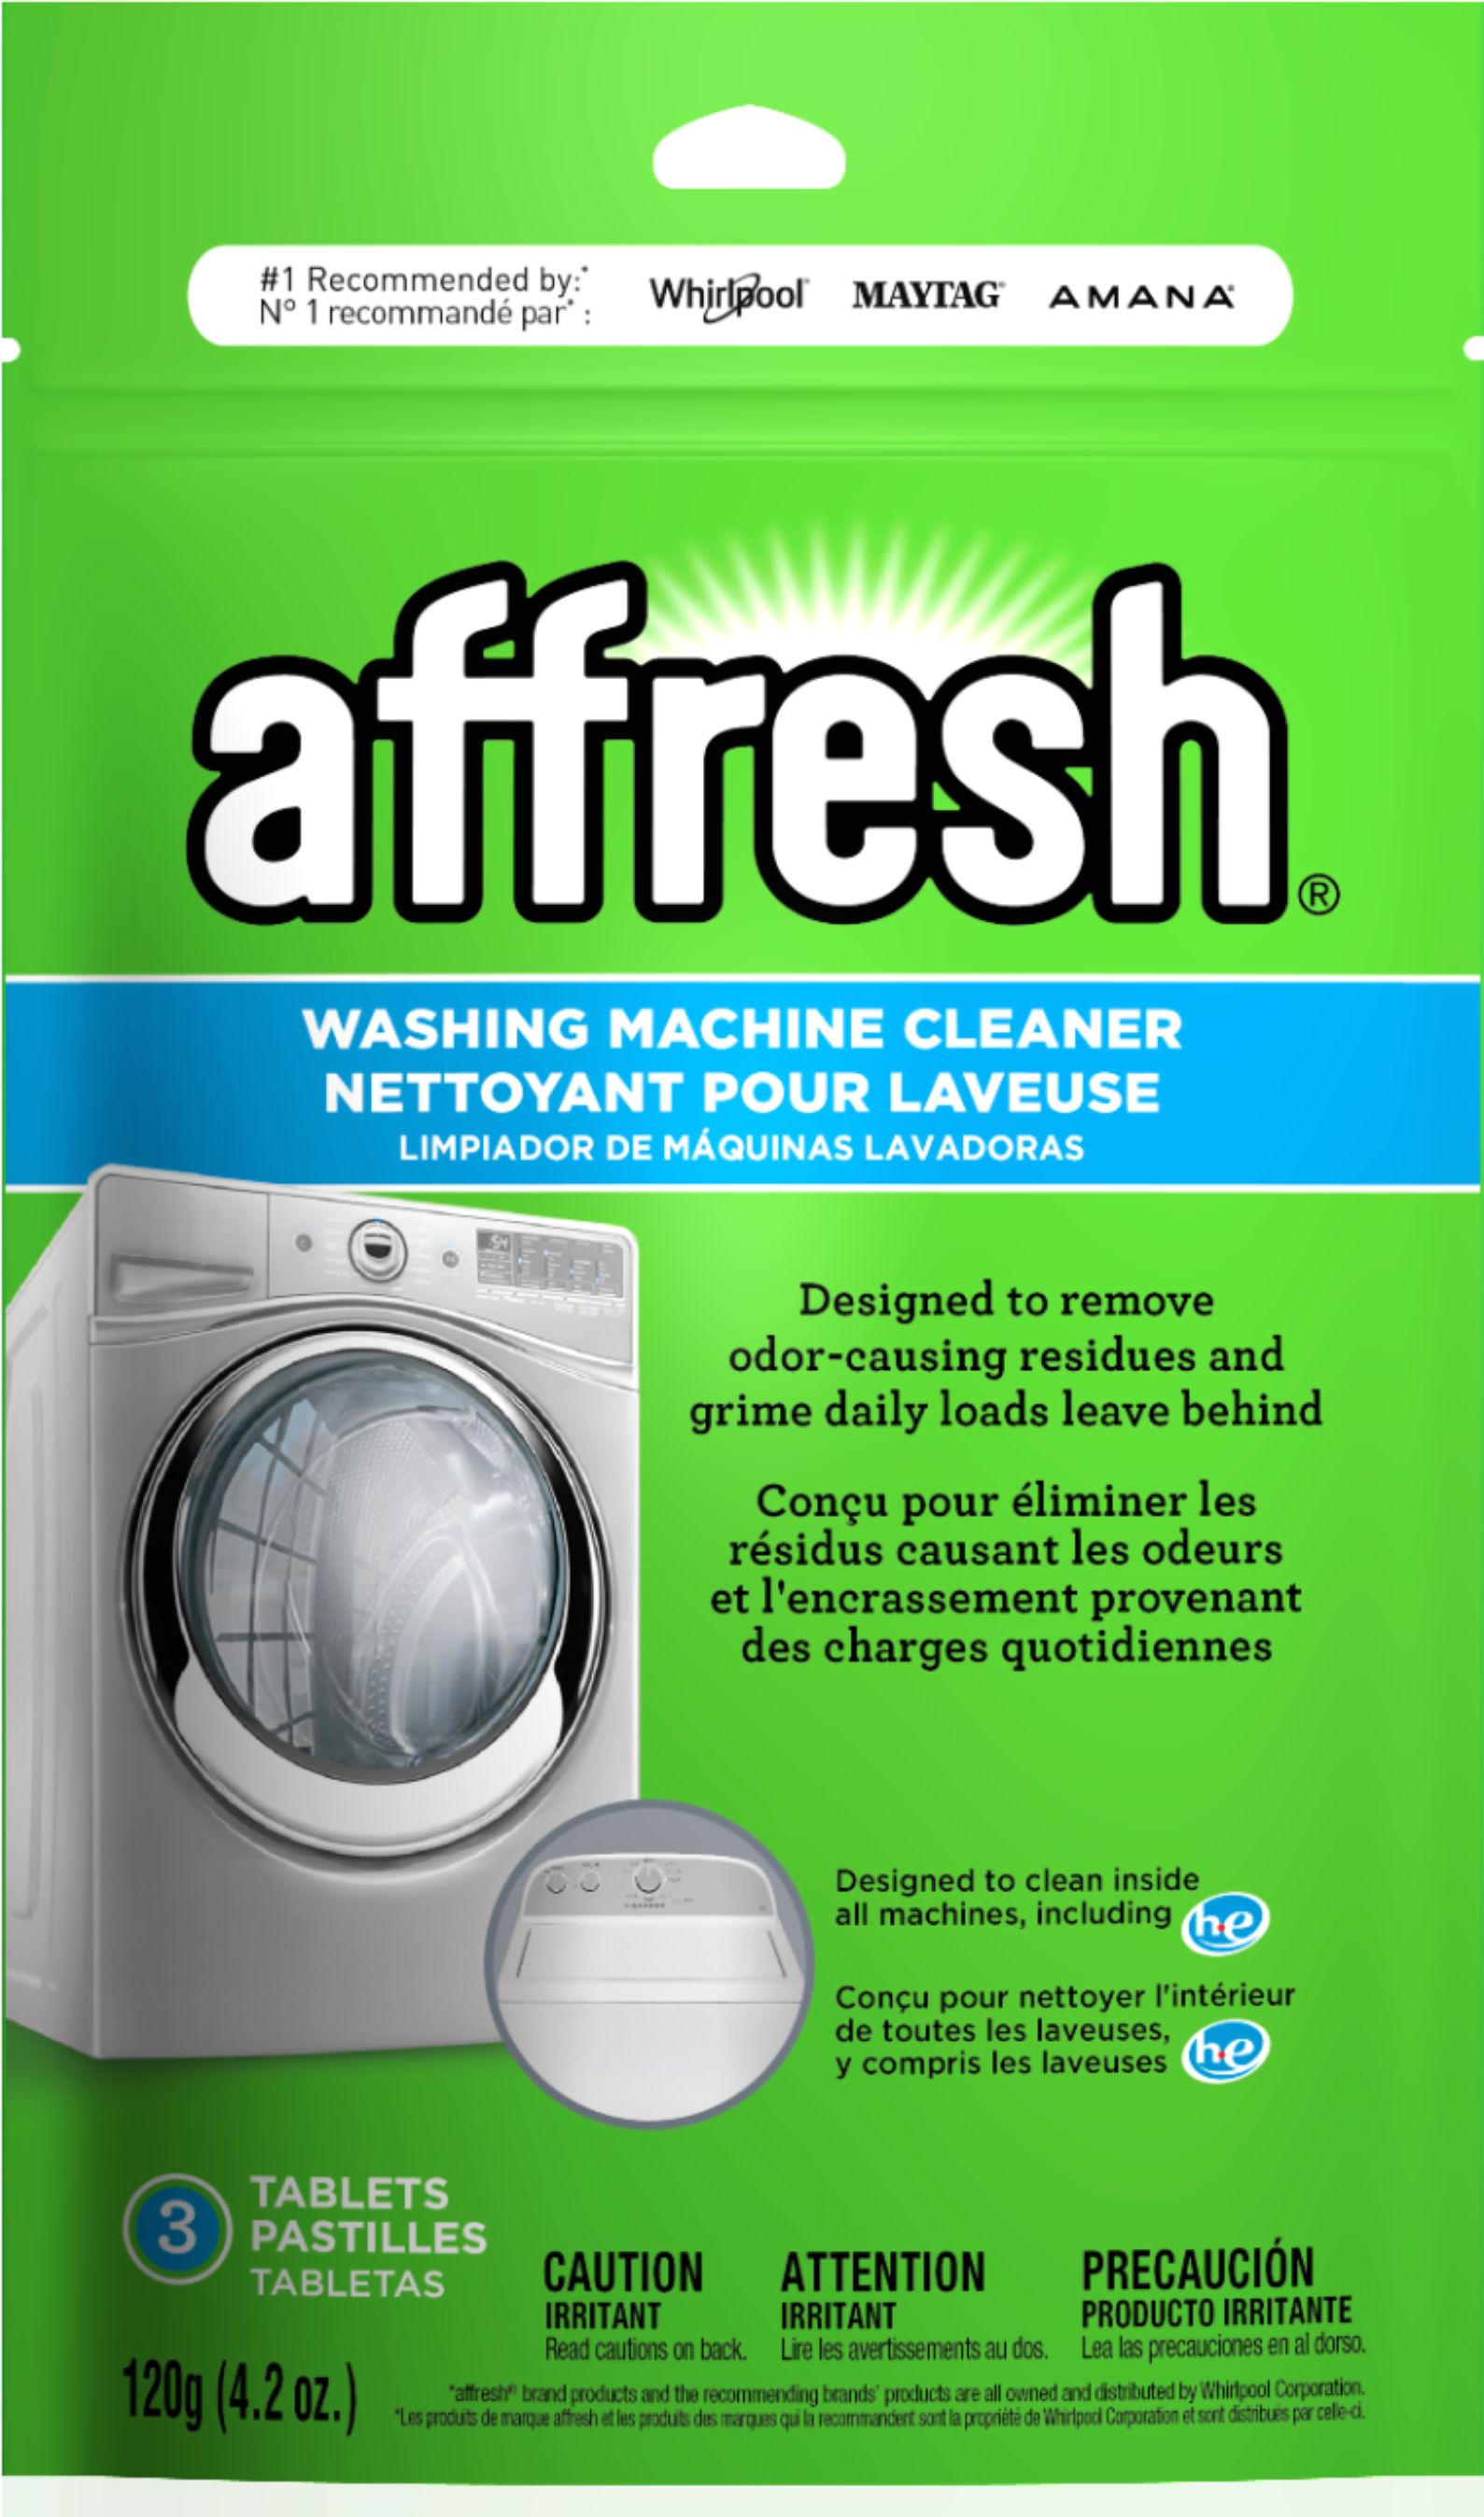 Count Dissolving 6 Tablets Affresh Washing Machine Cleaner 